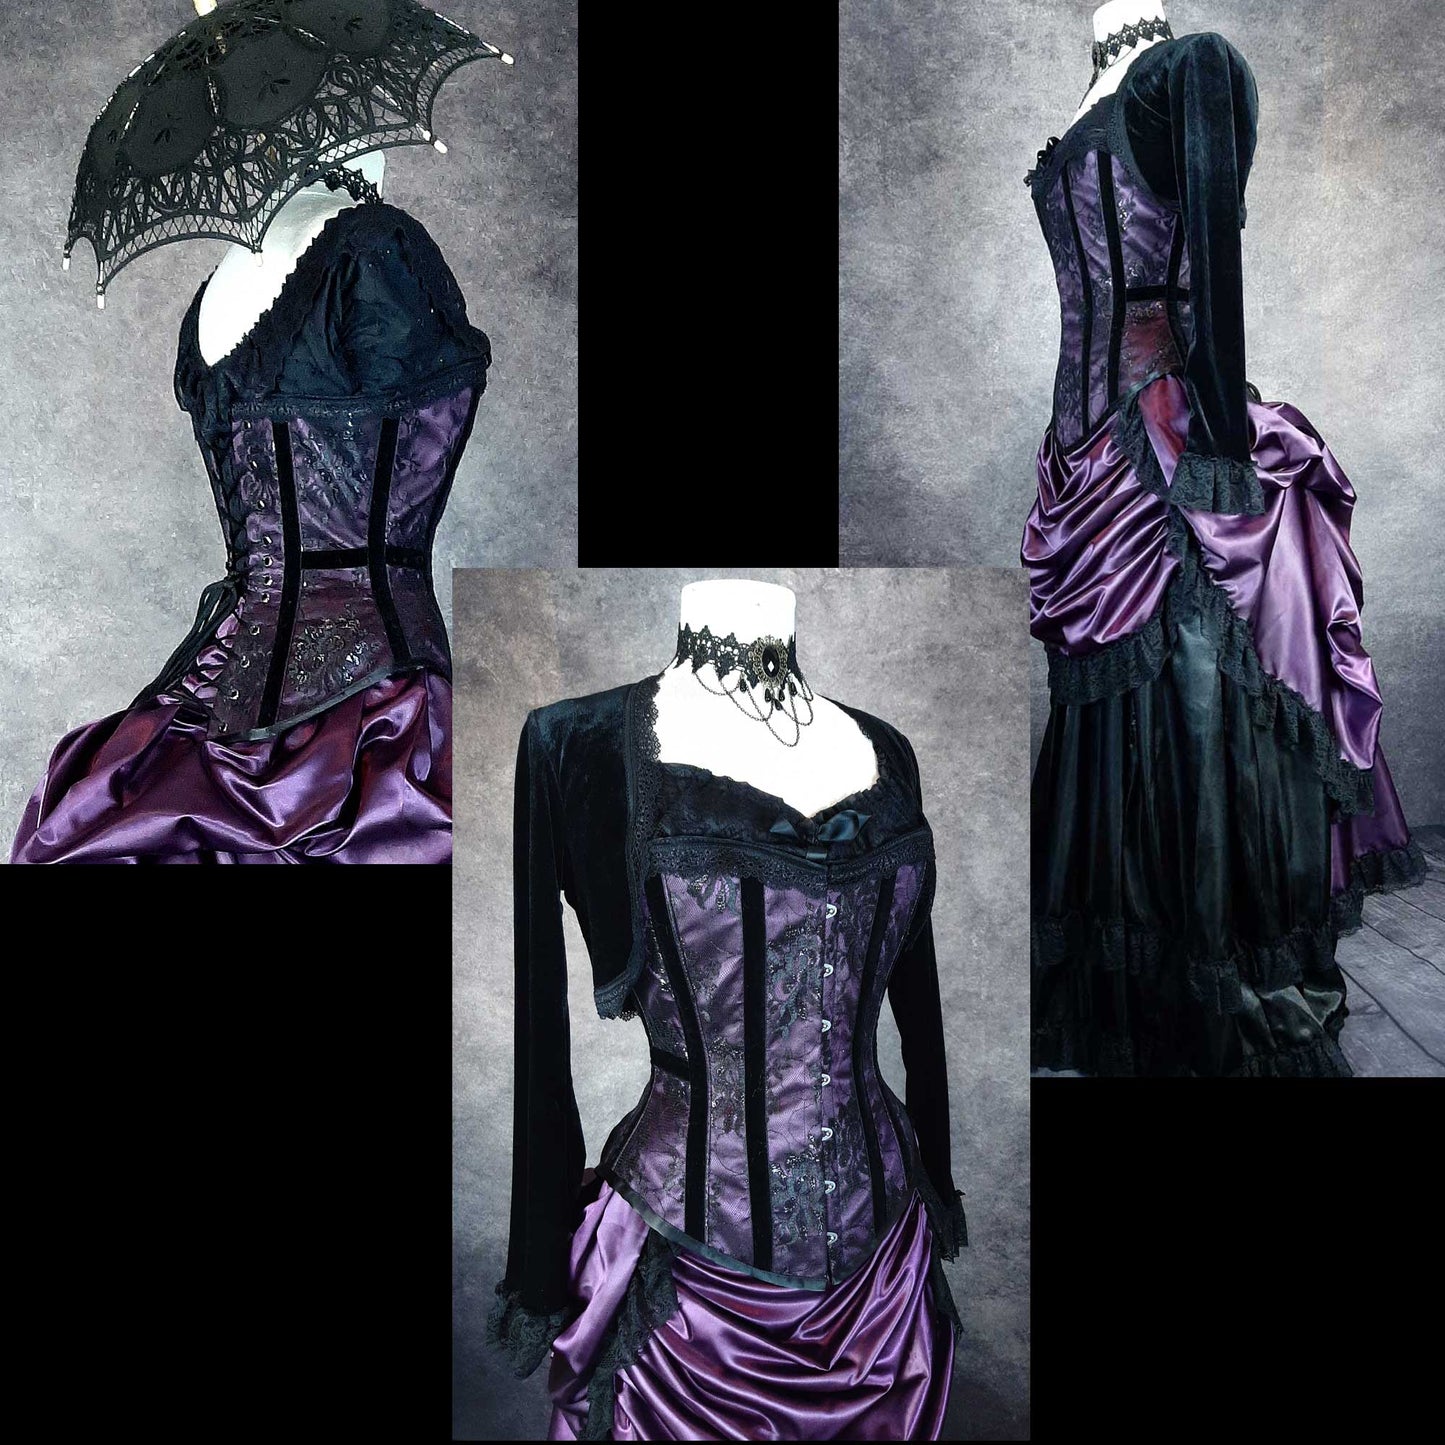 3 photo layup featuring the matching Pandora Over bust corset to the deluxe victorian bustle skirt in amethyst satin